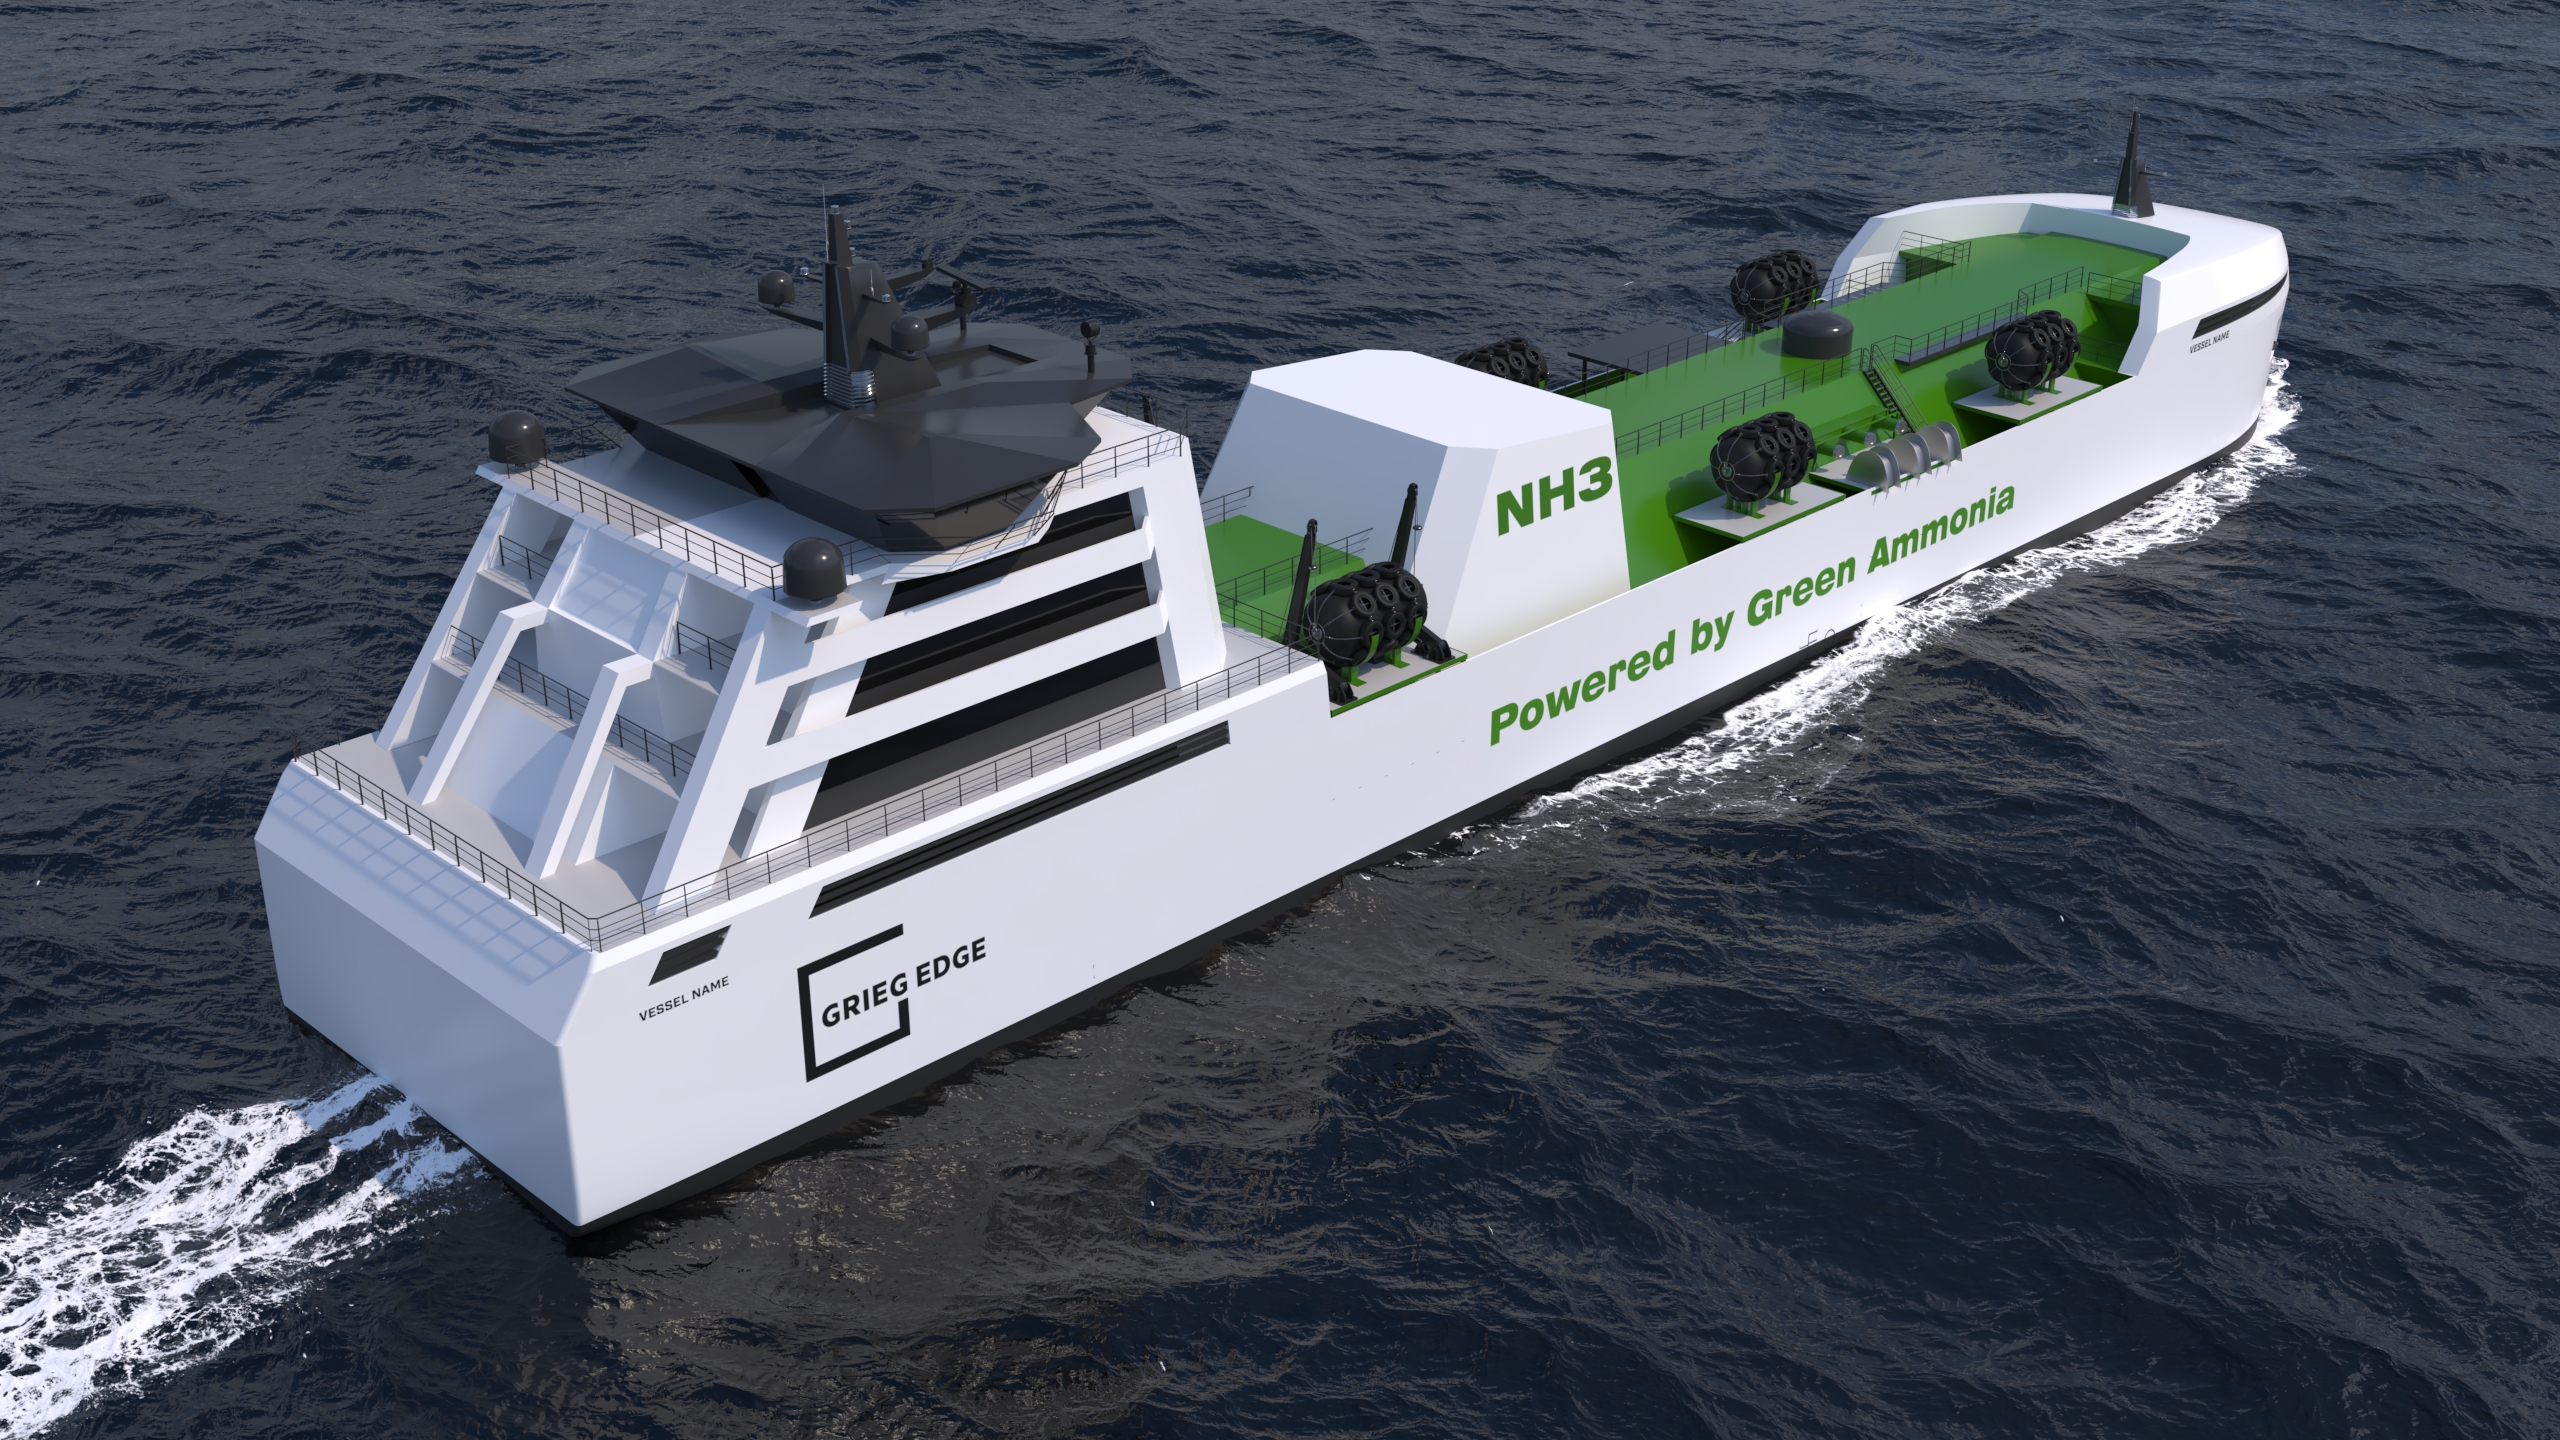 Prototype of the new Grieg Edge ship, powered with green ammonia.